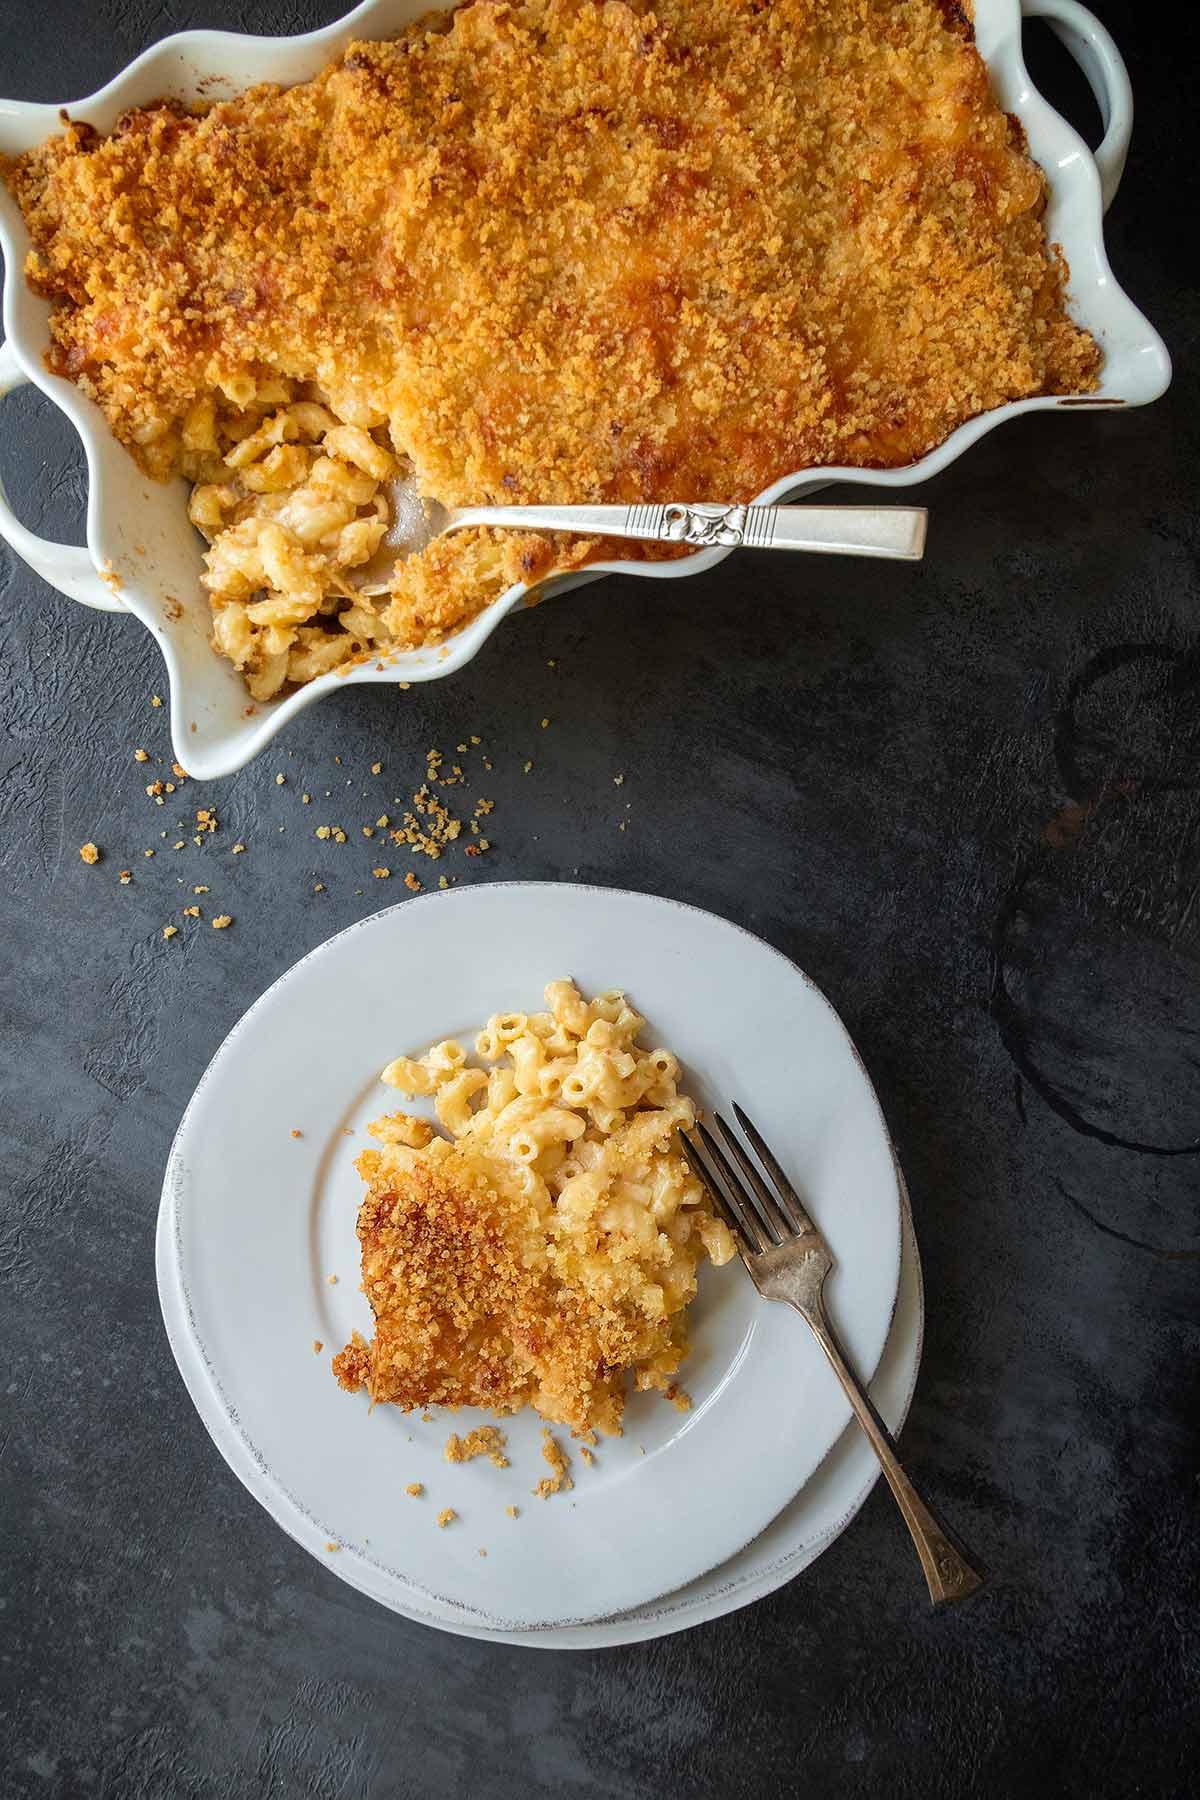 A casserole dish of mac and cheese with a plate with a portion of the pasta.